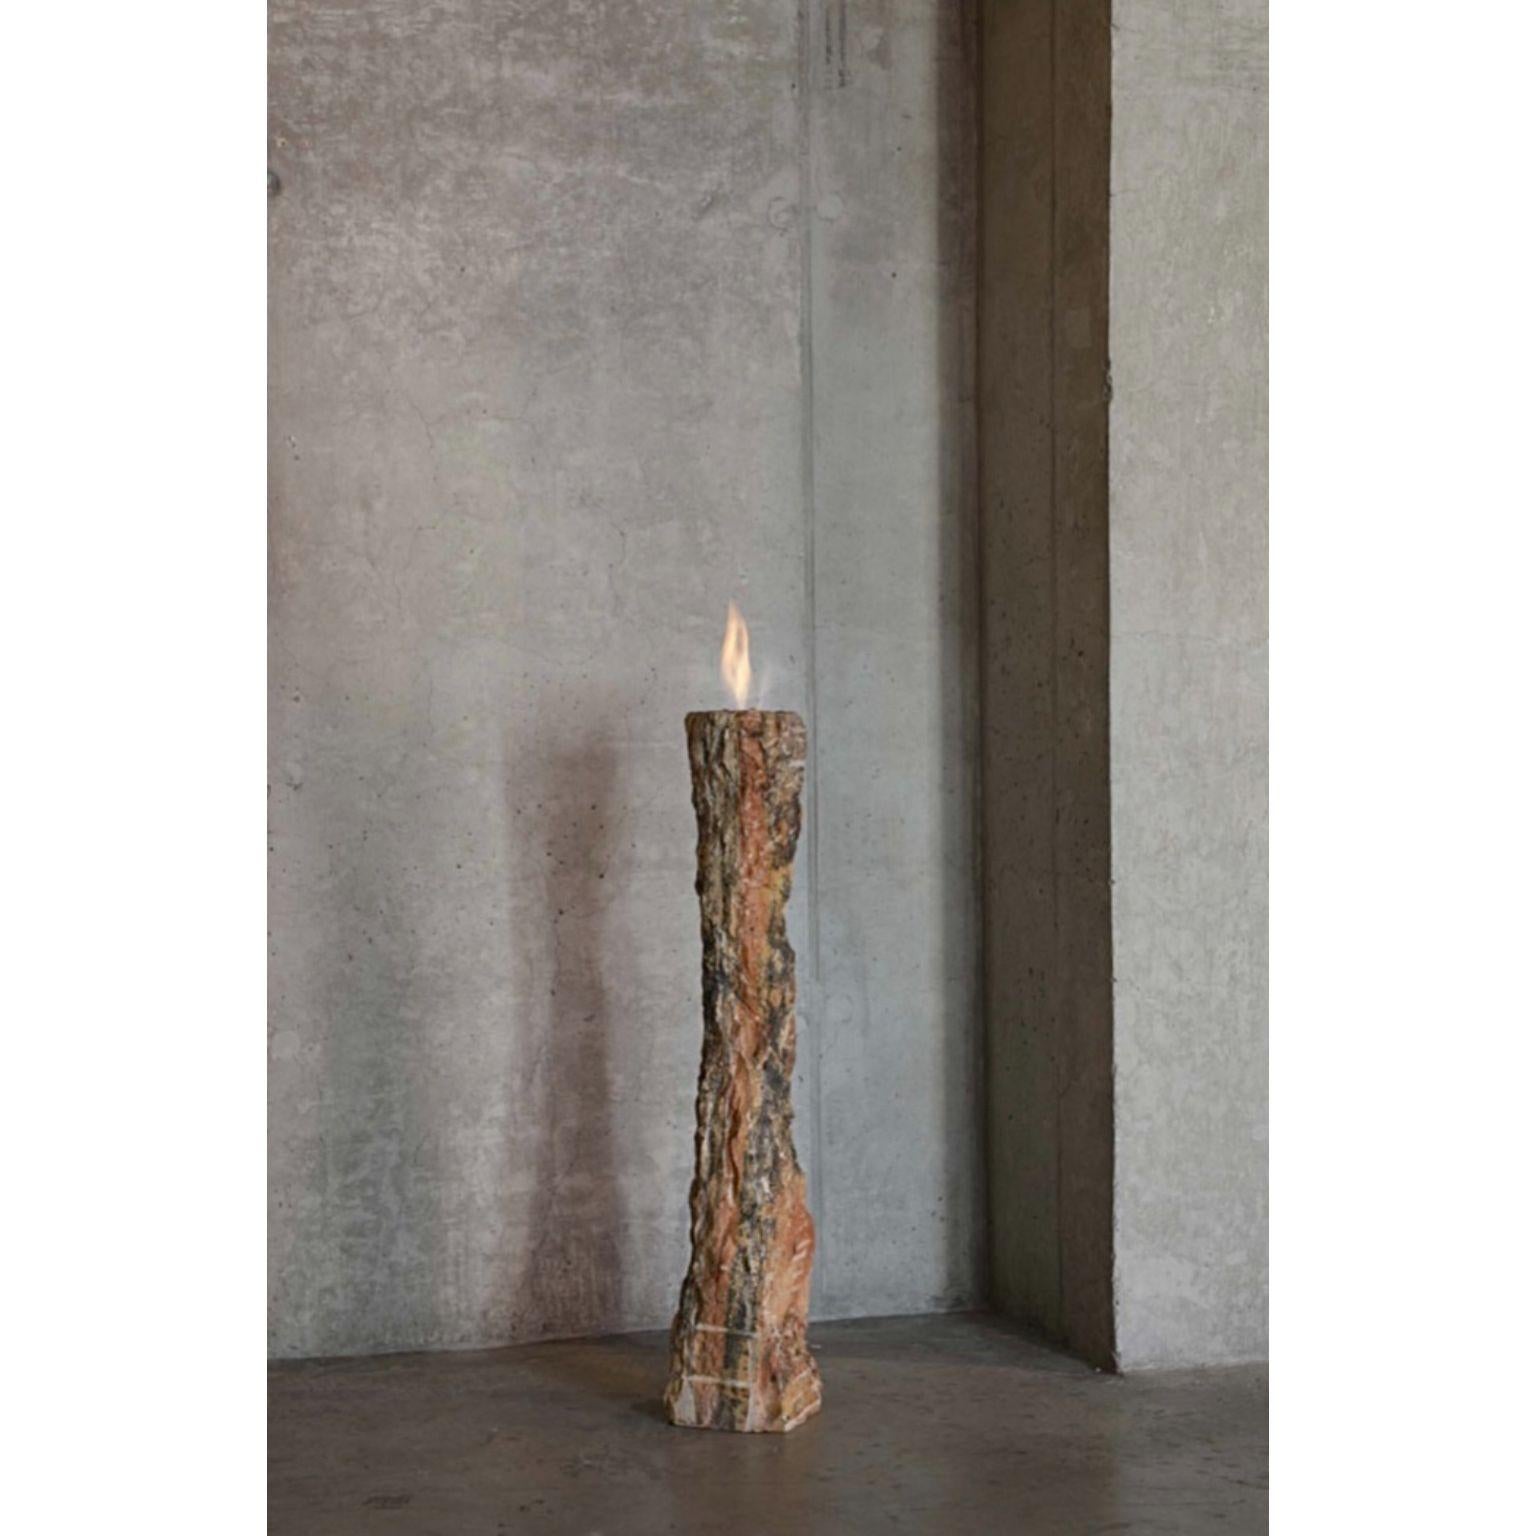 Egocentric fire sculpture by Andres Monnier.
One of a Kind.
Dimensions: D 110 x W 150 x H 40 cm.
Materials: grey quarry stone.

Designer's biography

Treko concrete is a Mexican studio based in Ensenada, that has as a purpose to create